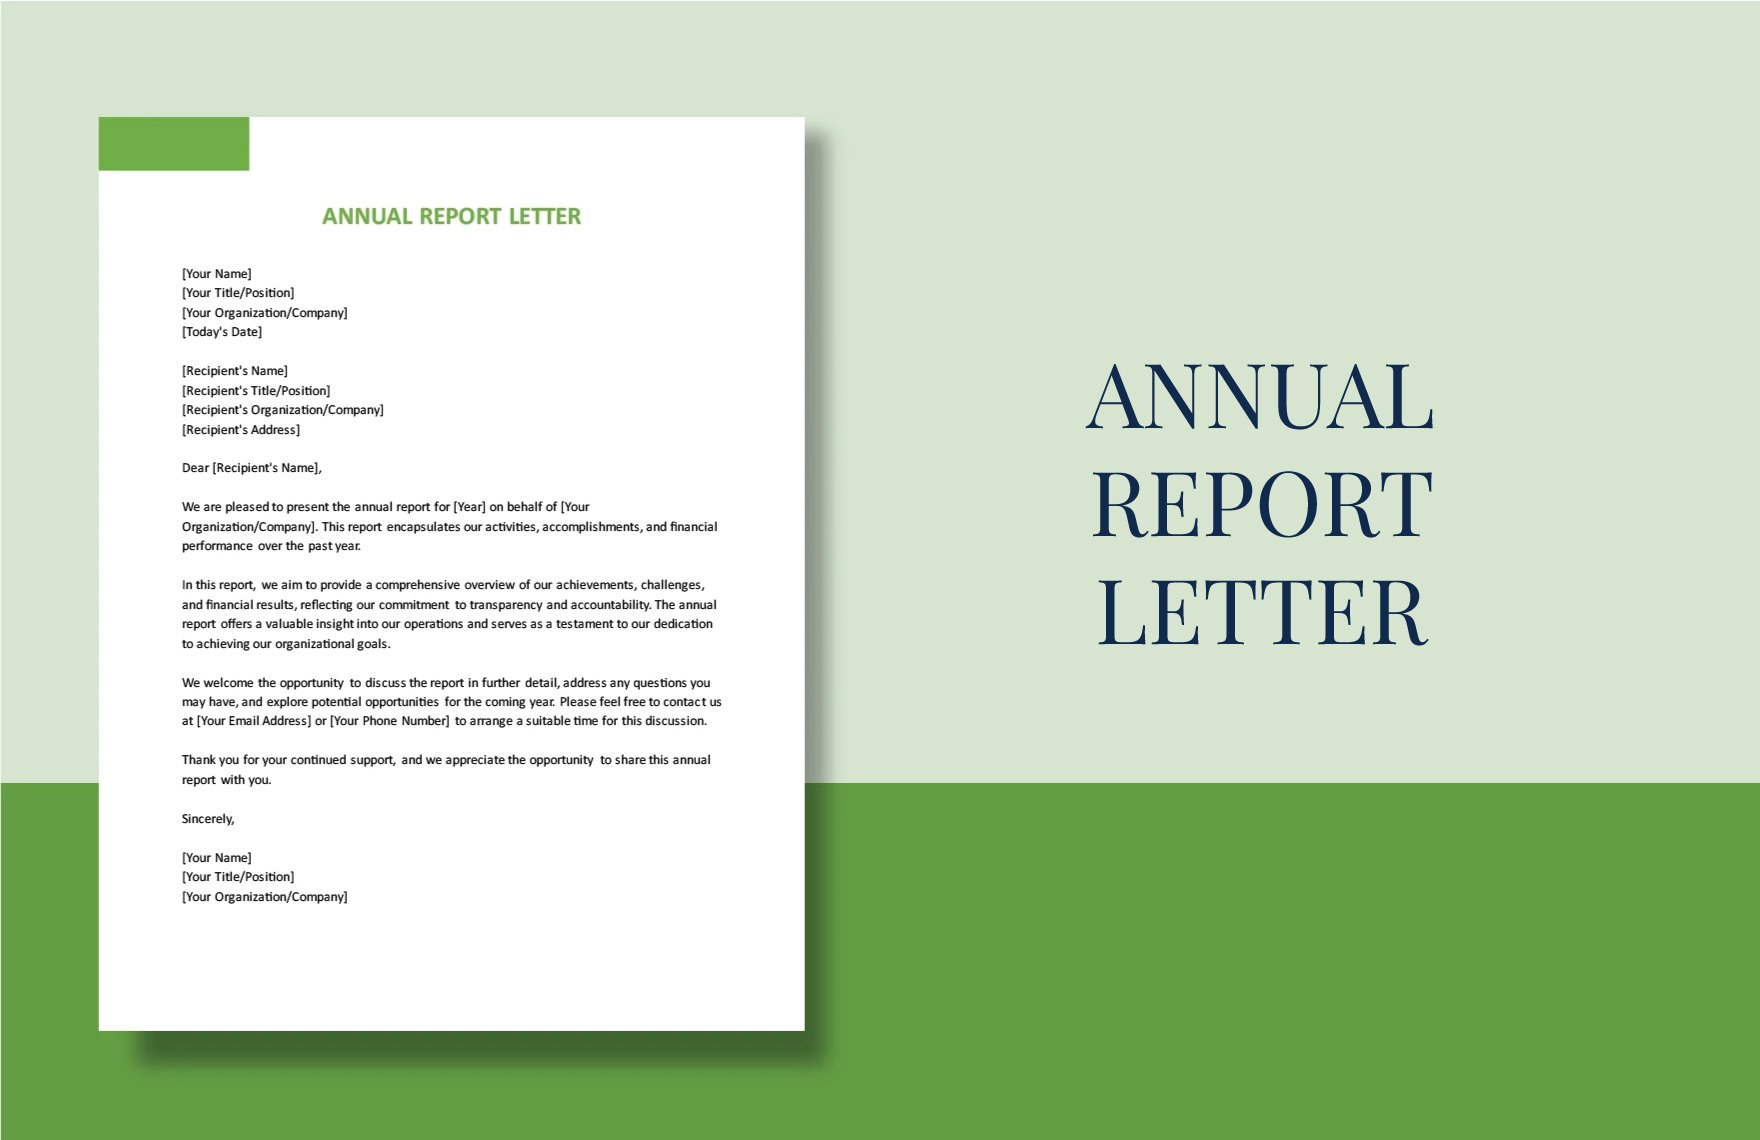 Annual Report Letter in Word, Google Docs, PDF